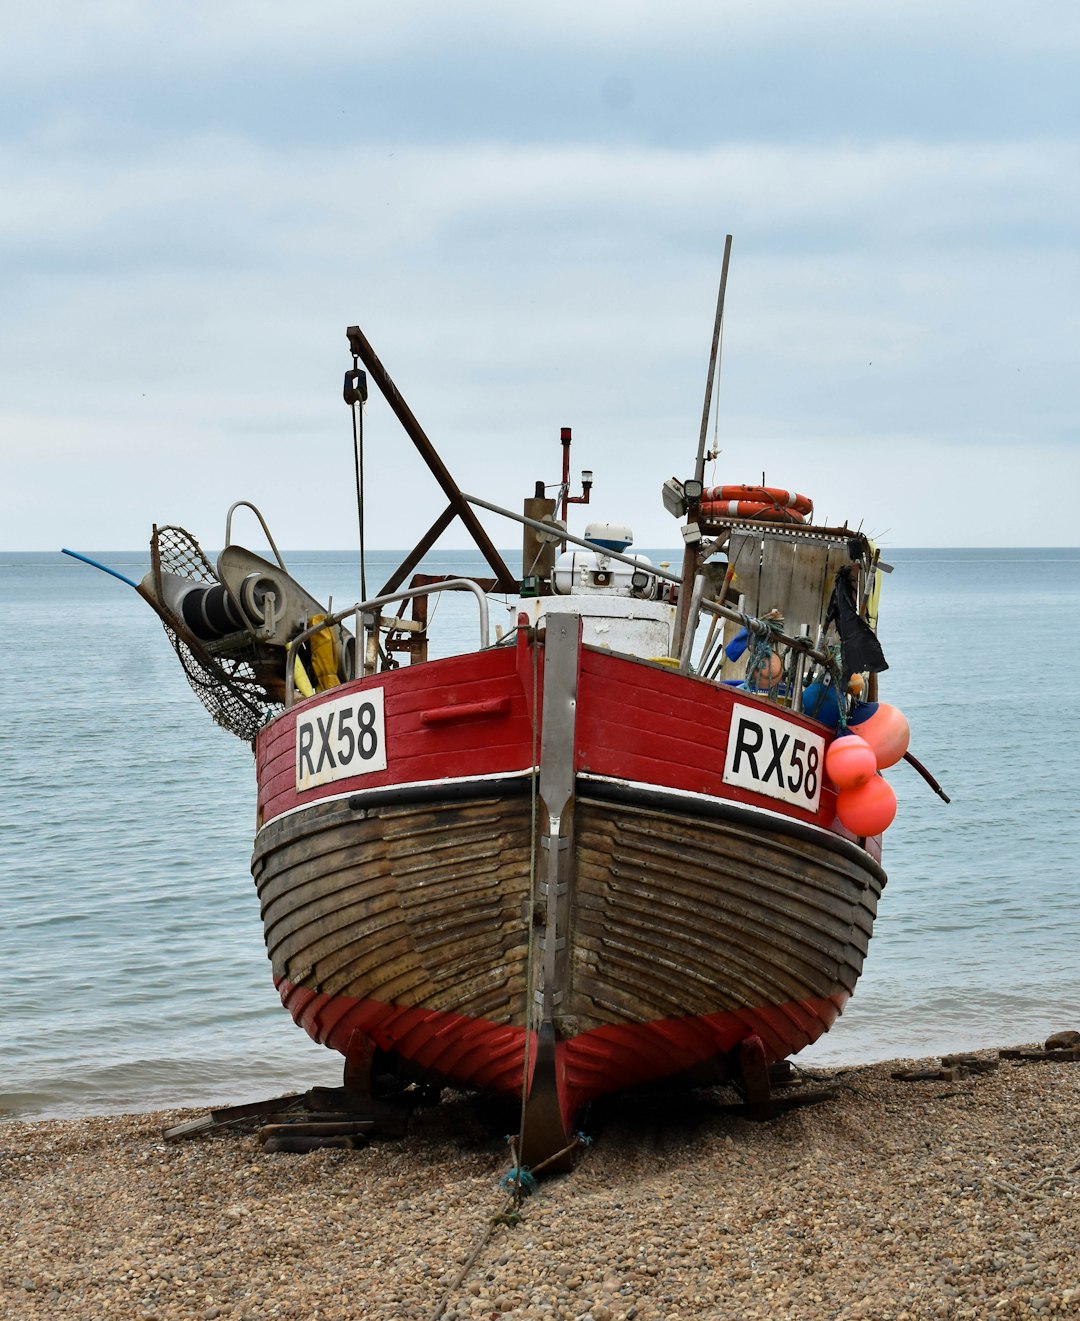 red and white boat on beach during daytime